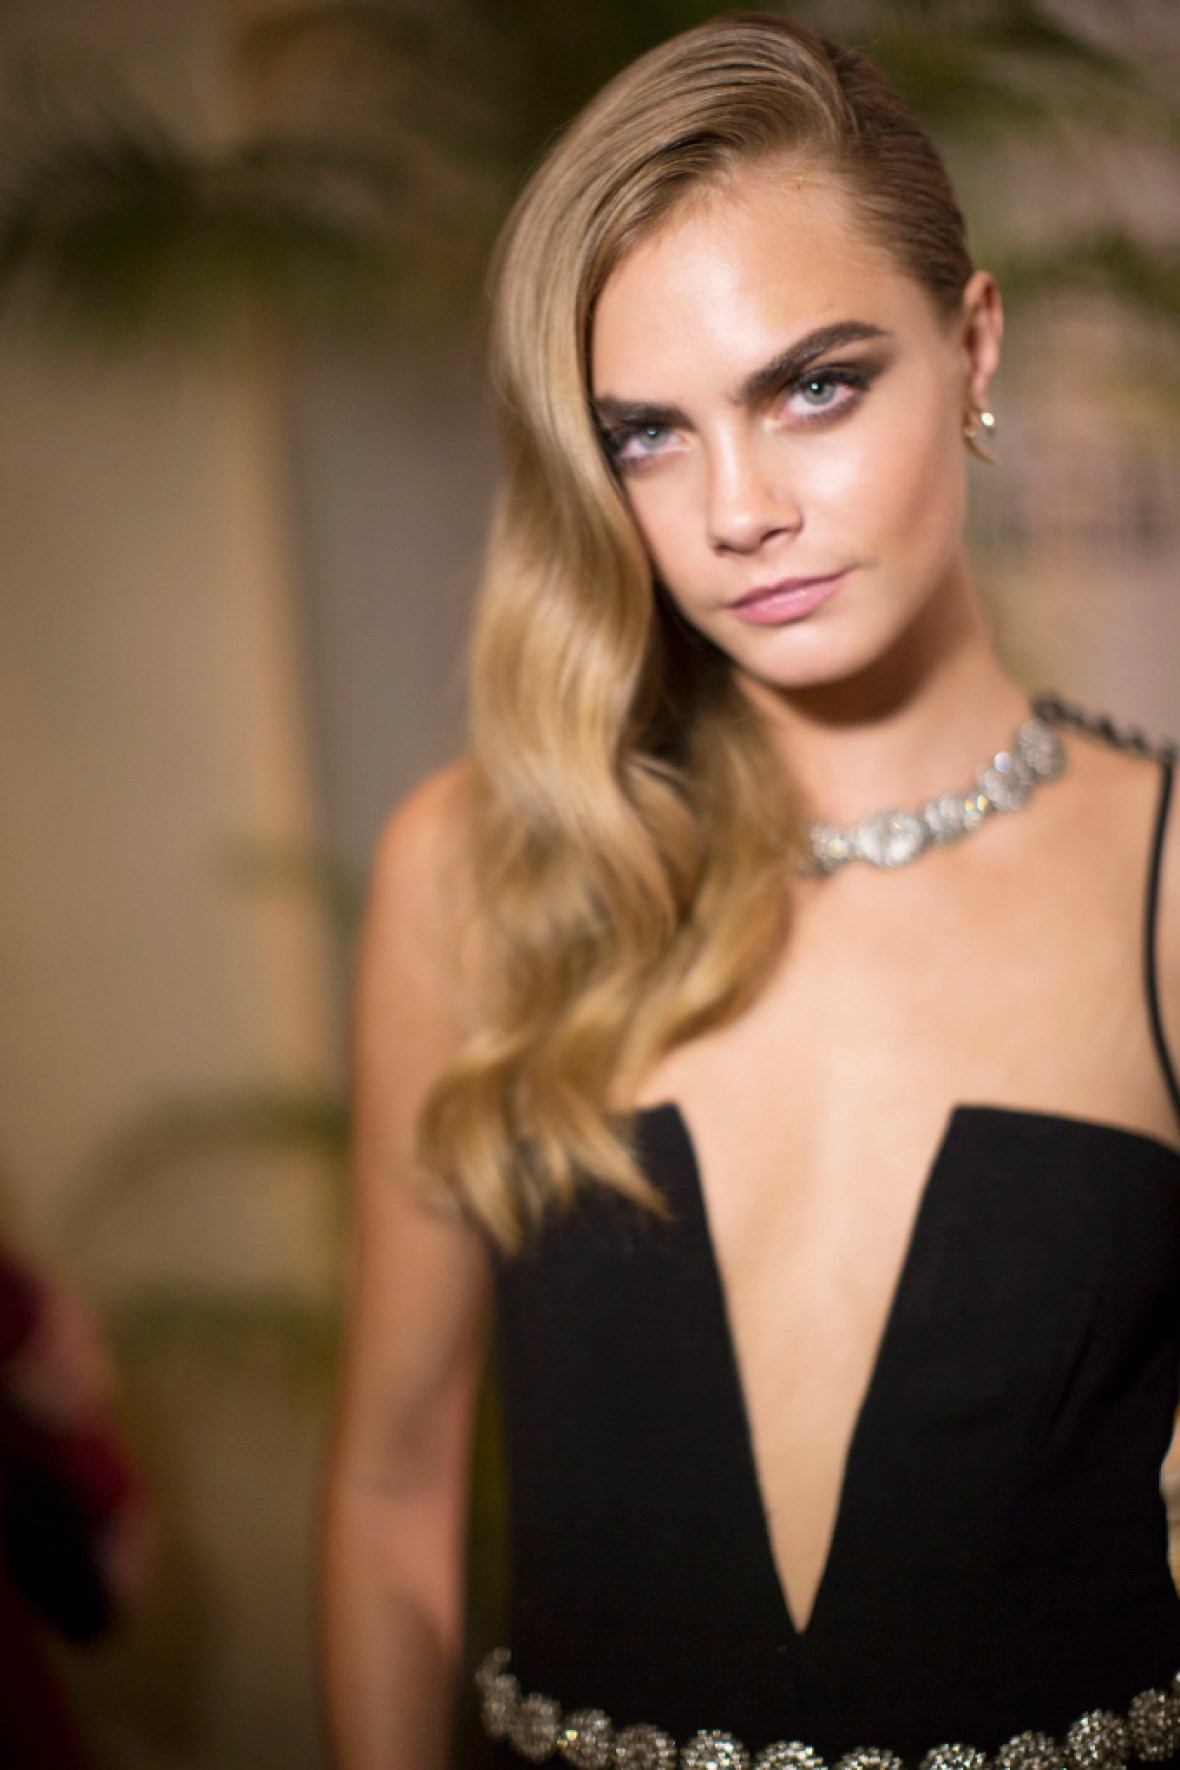 Cara Delevingne Opens Up About Struggle With Psoriasis, Saying It Made